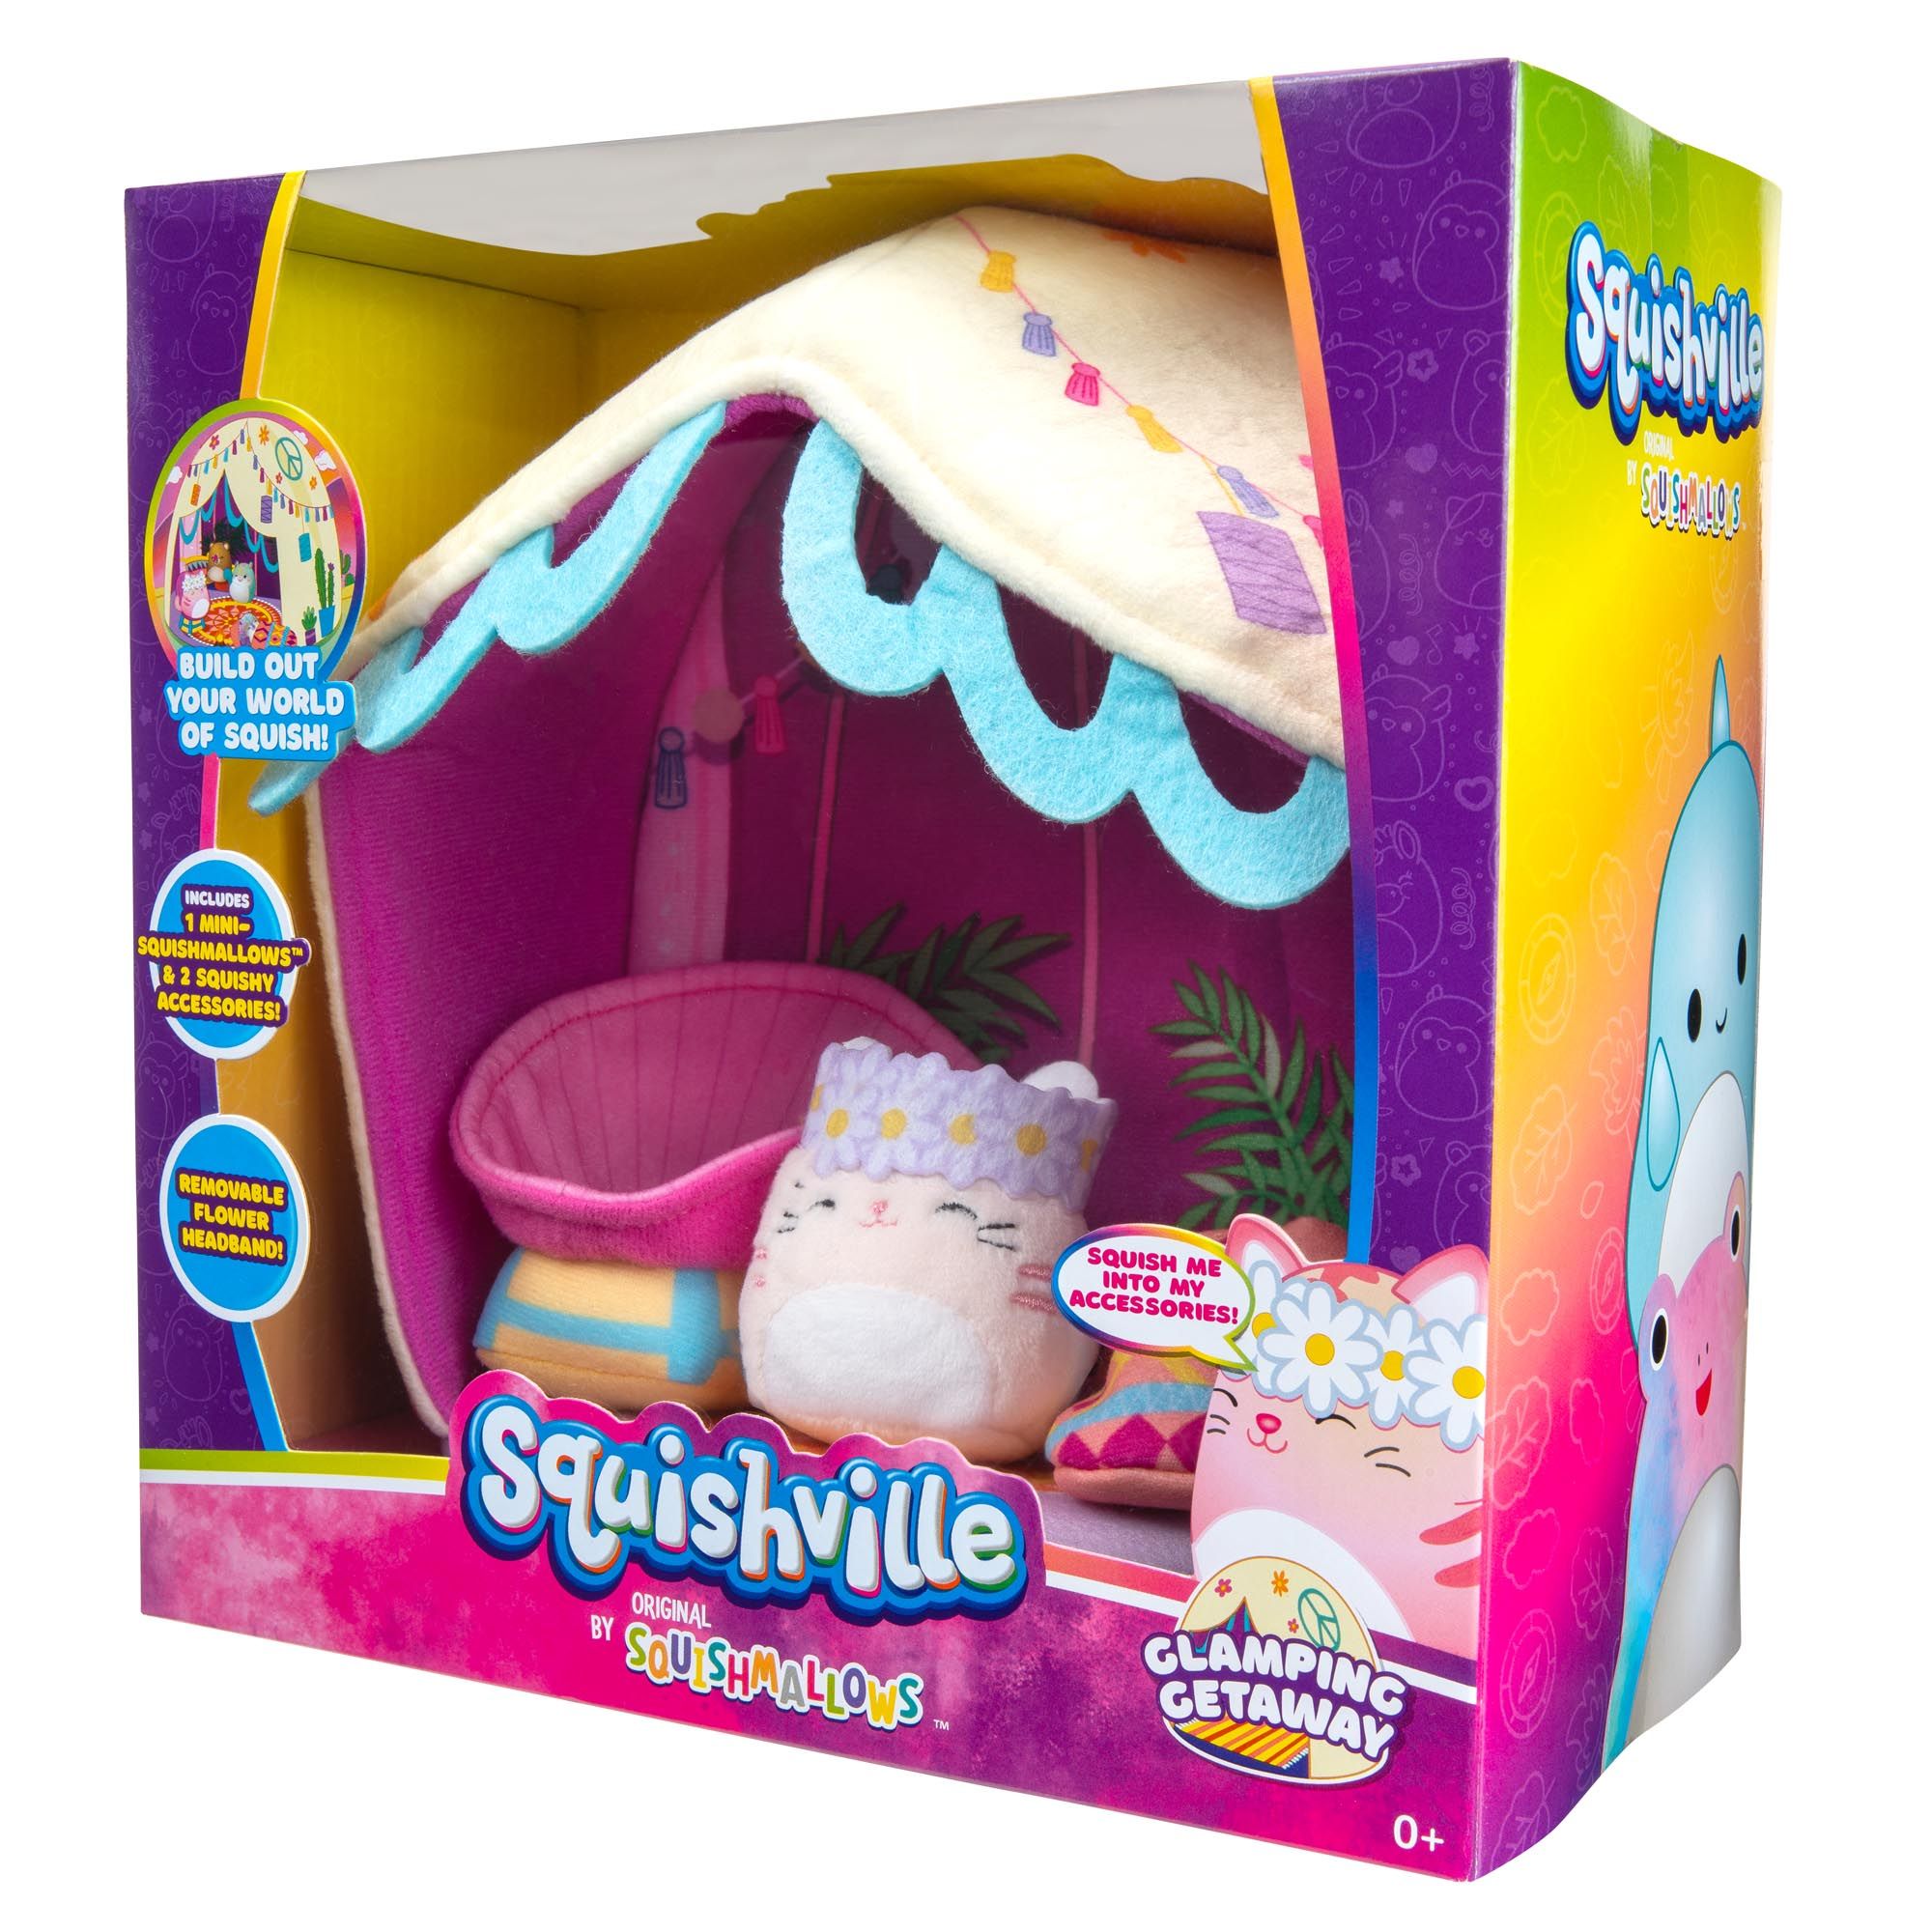 An image of Squishville Deluxe Play Scene Glamping Getaway